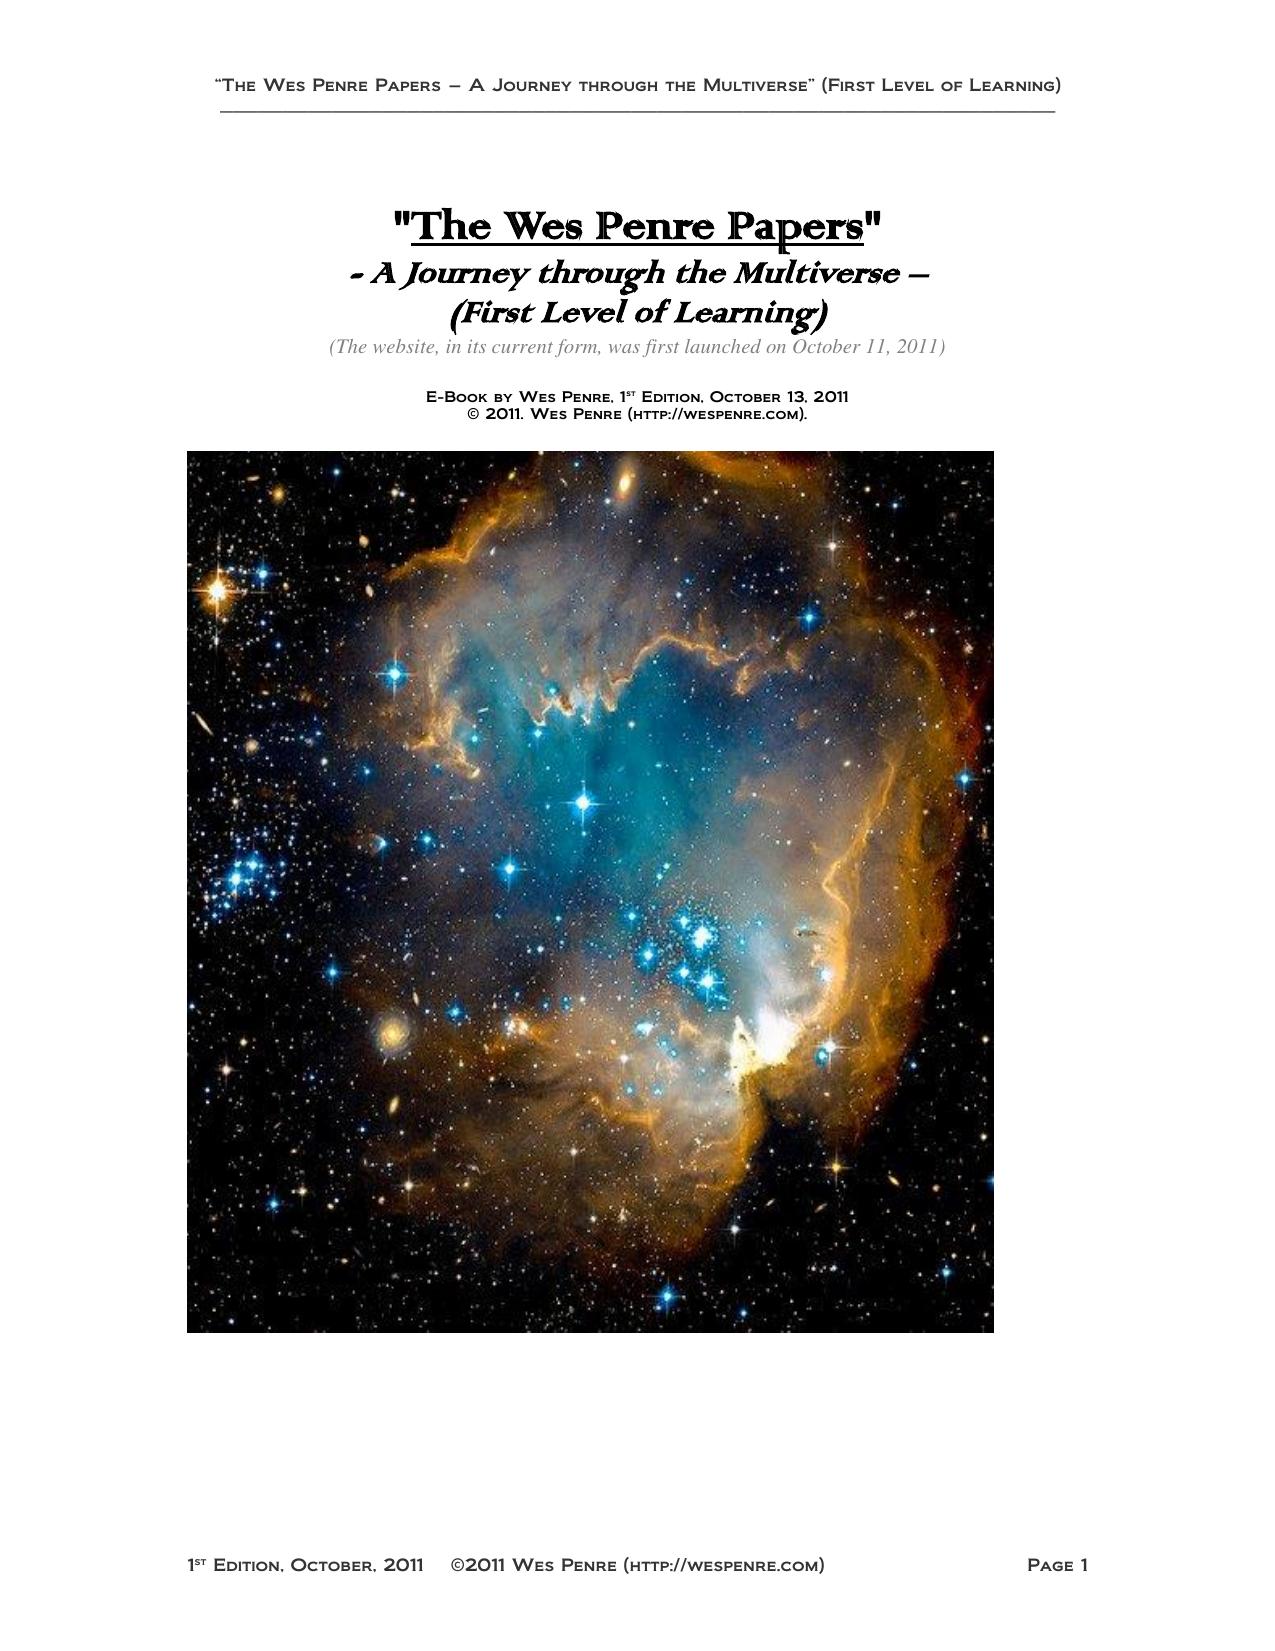 The Wes Penre Papers - A Journey through the Multiverse (First Level of Learning)